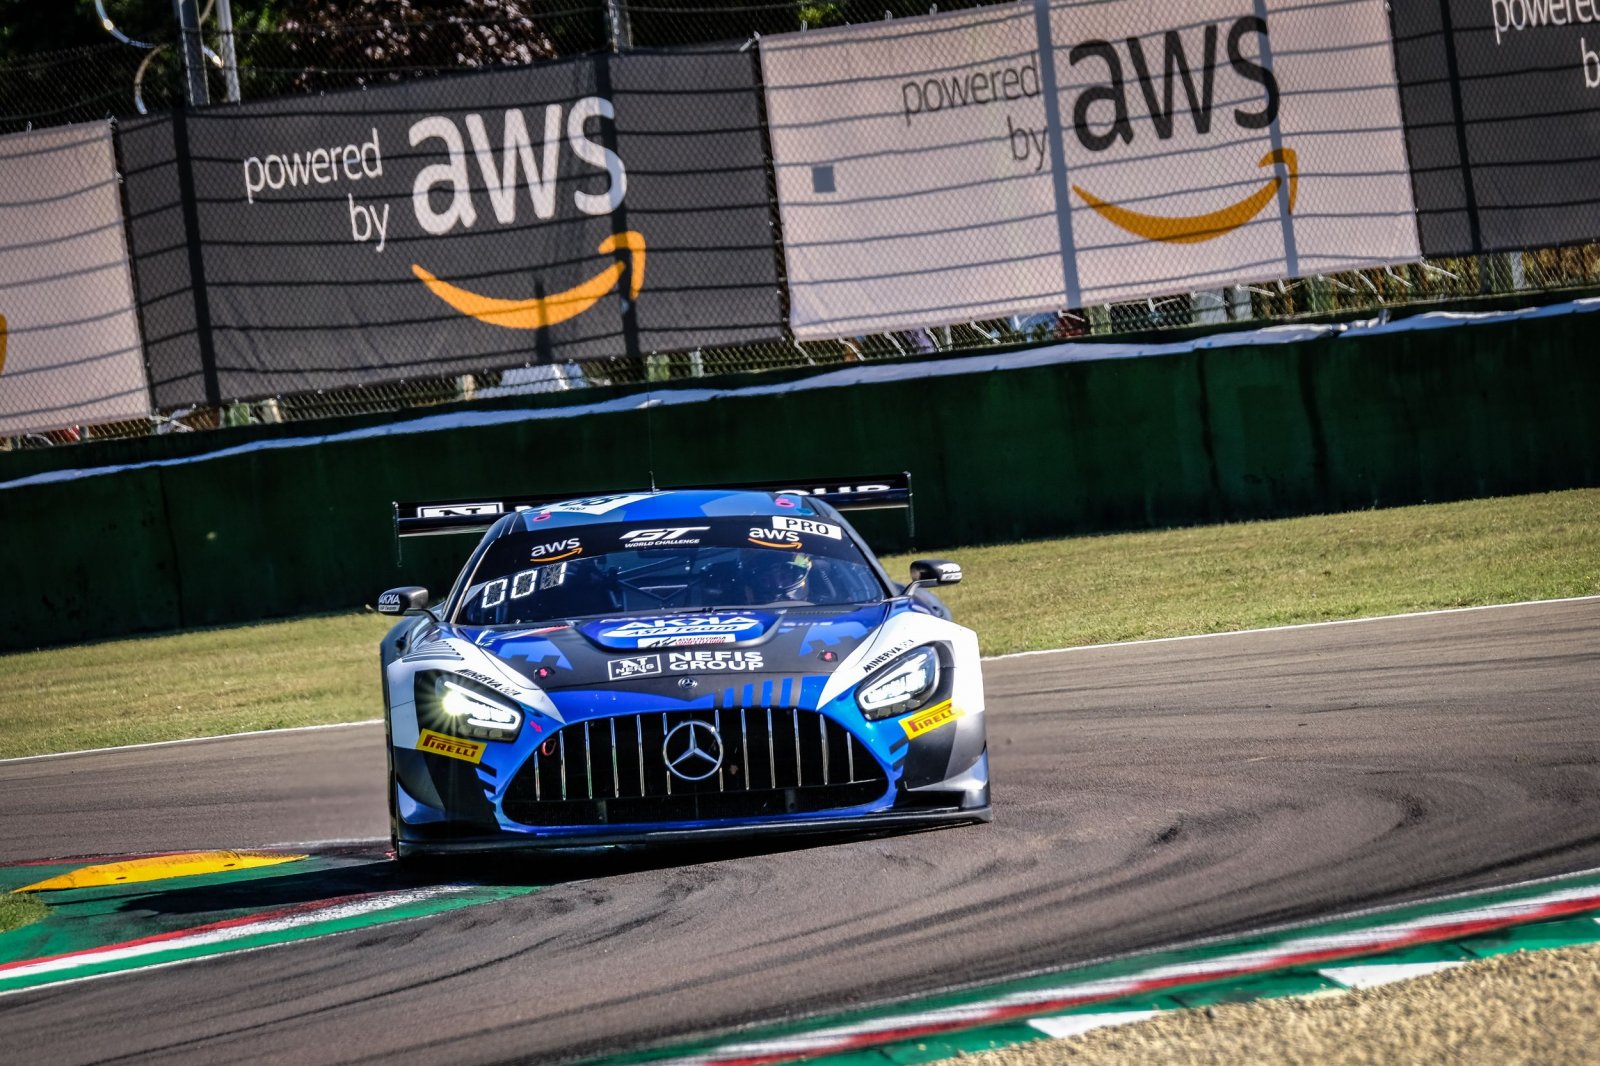 Marciello puts AKKA ASP Mercedes-AMG on top in opening practice at Imola